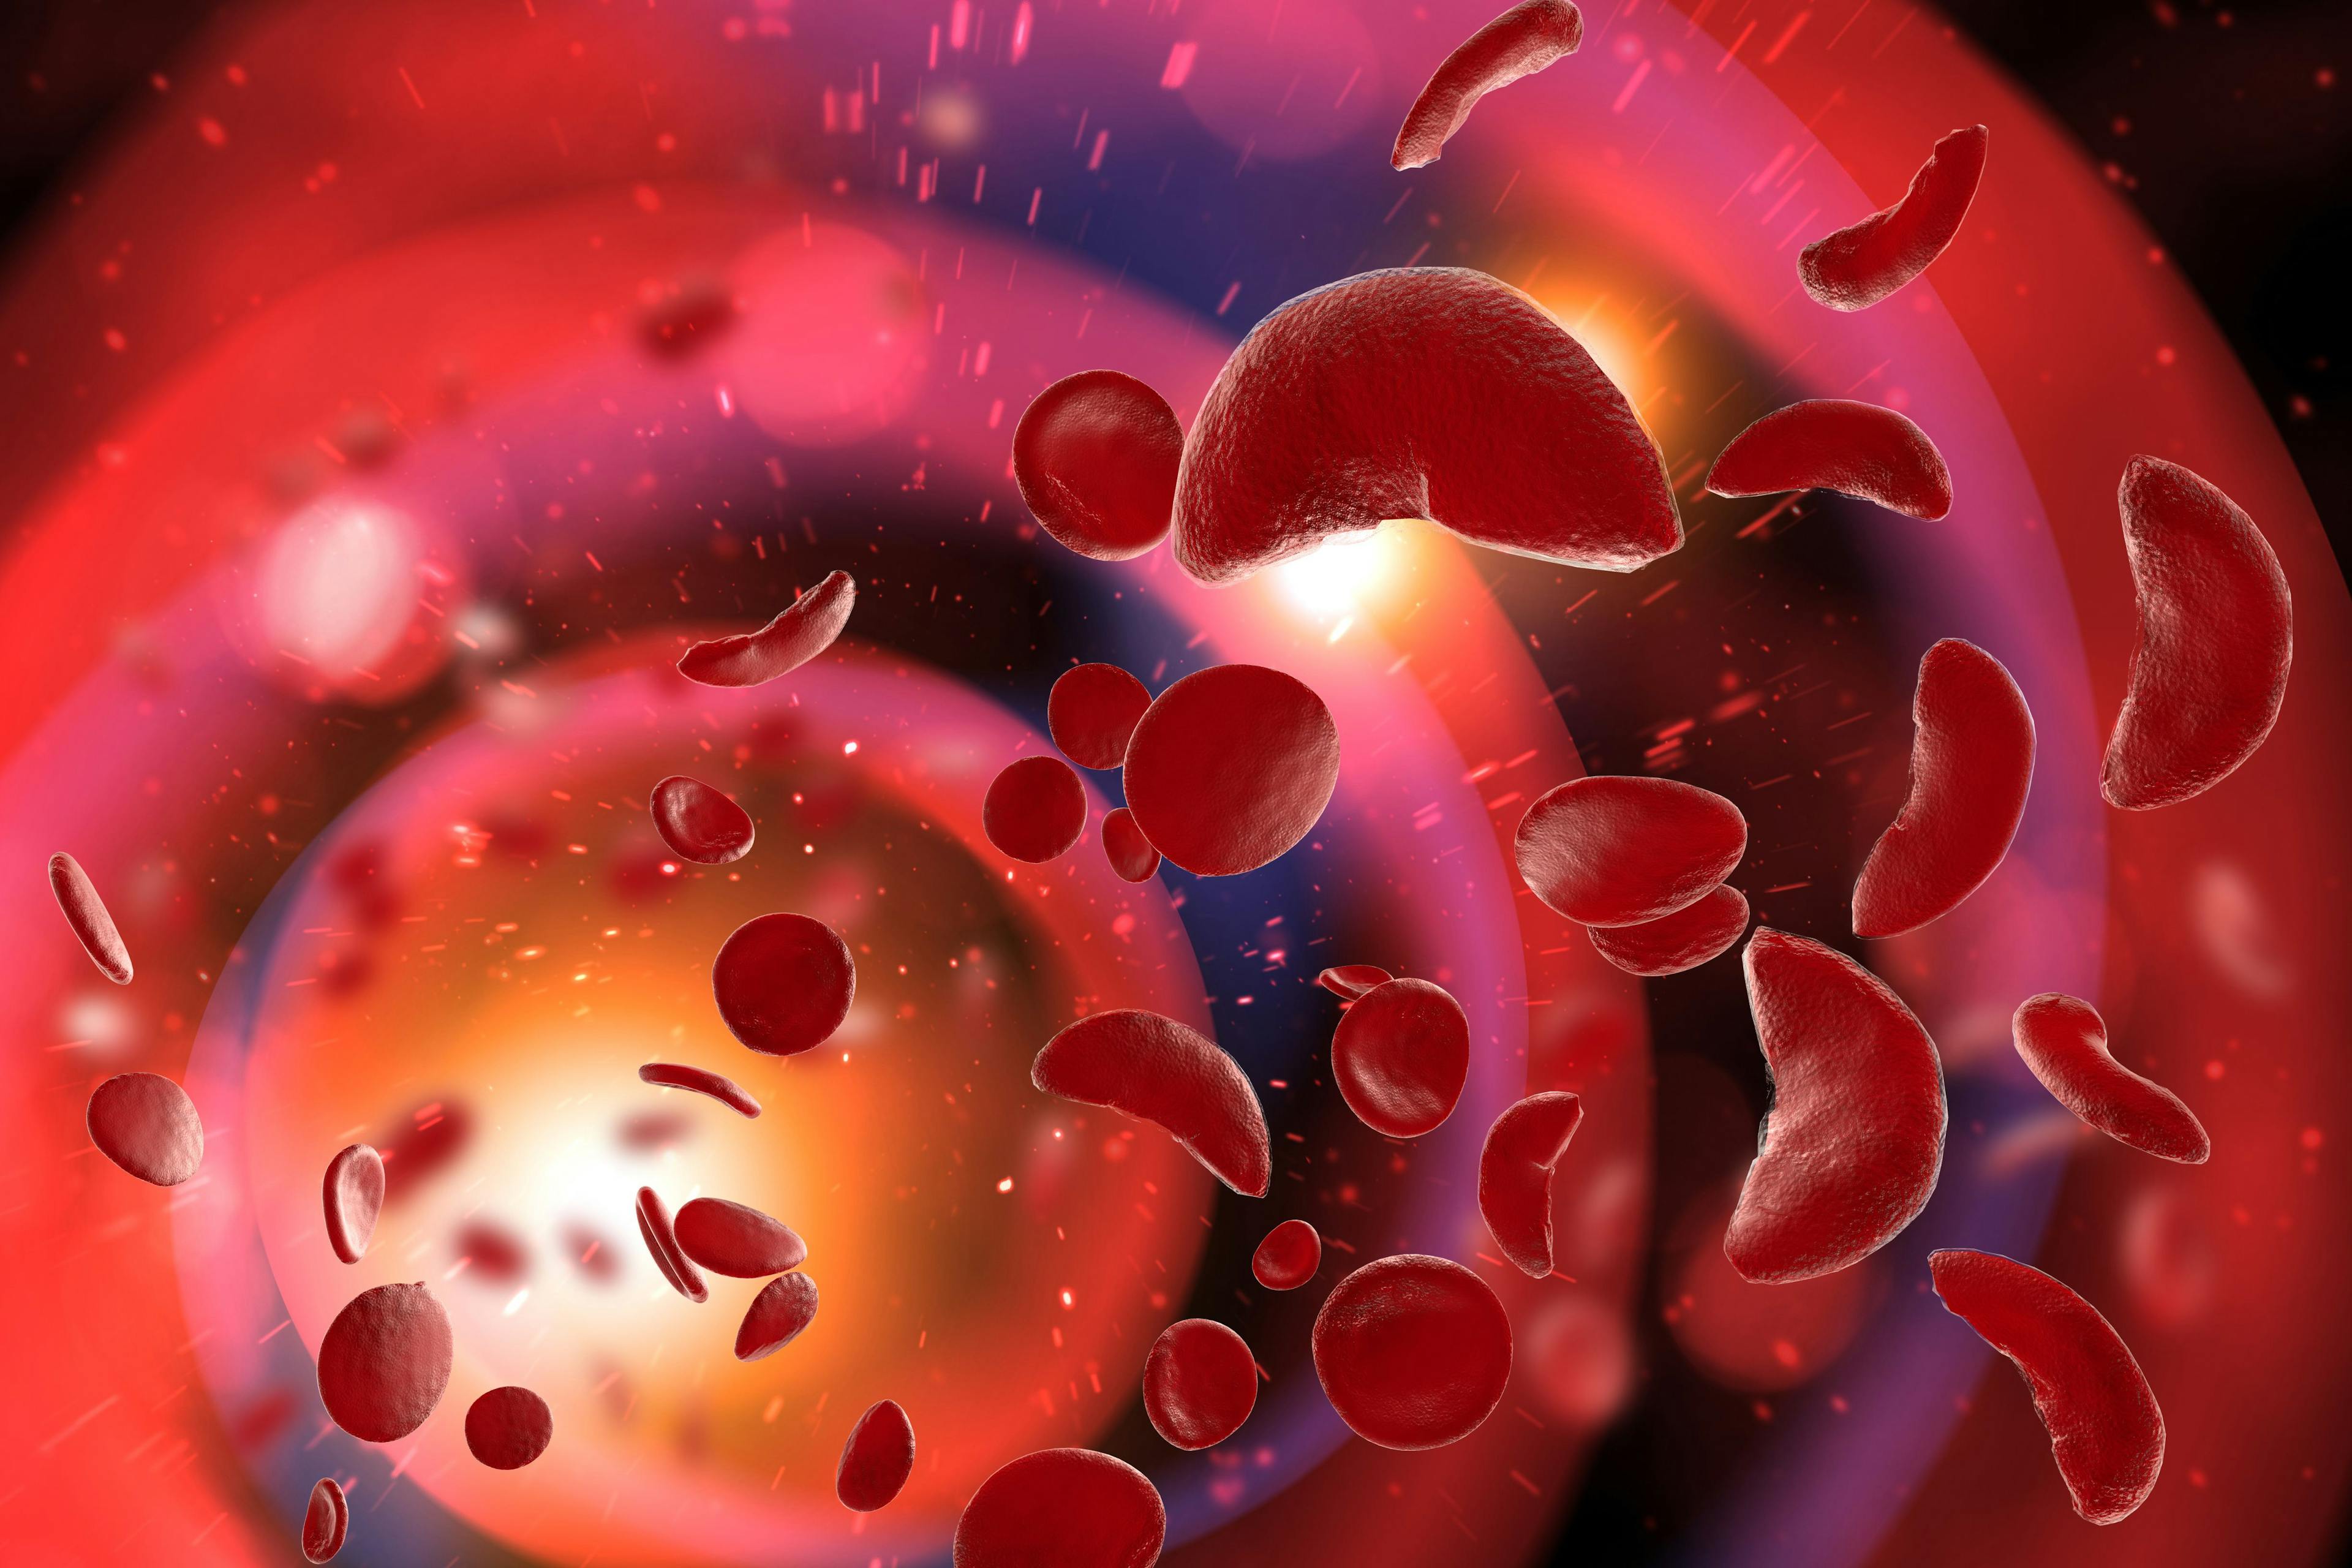 Sickle Cell Anemia 3D Illustration | Ezume Images - stock.adobe.com